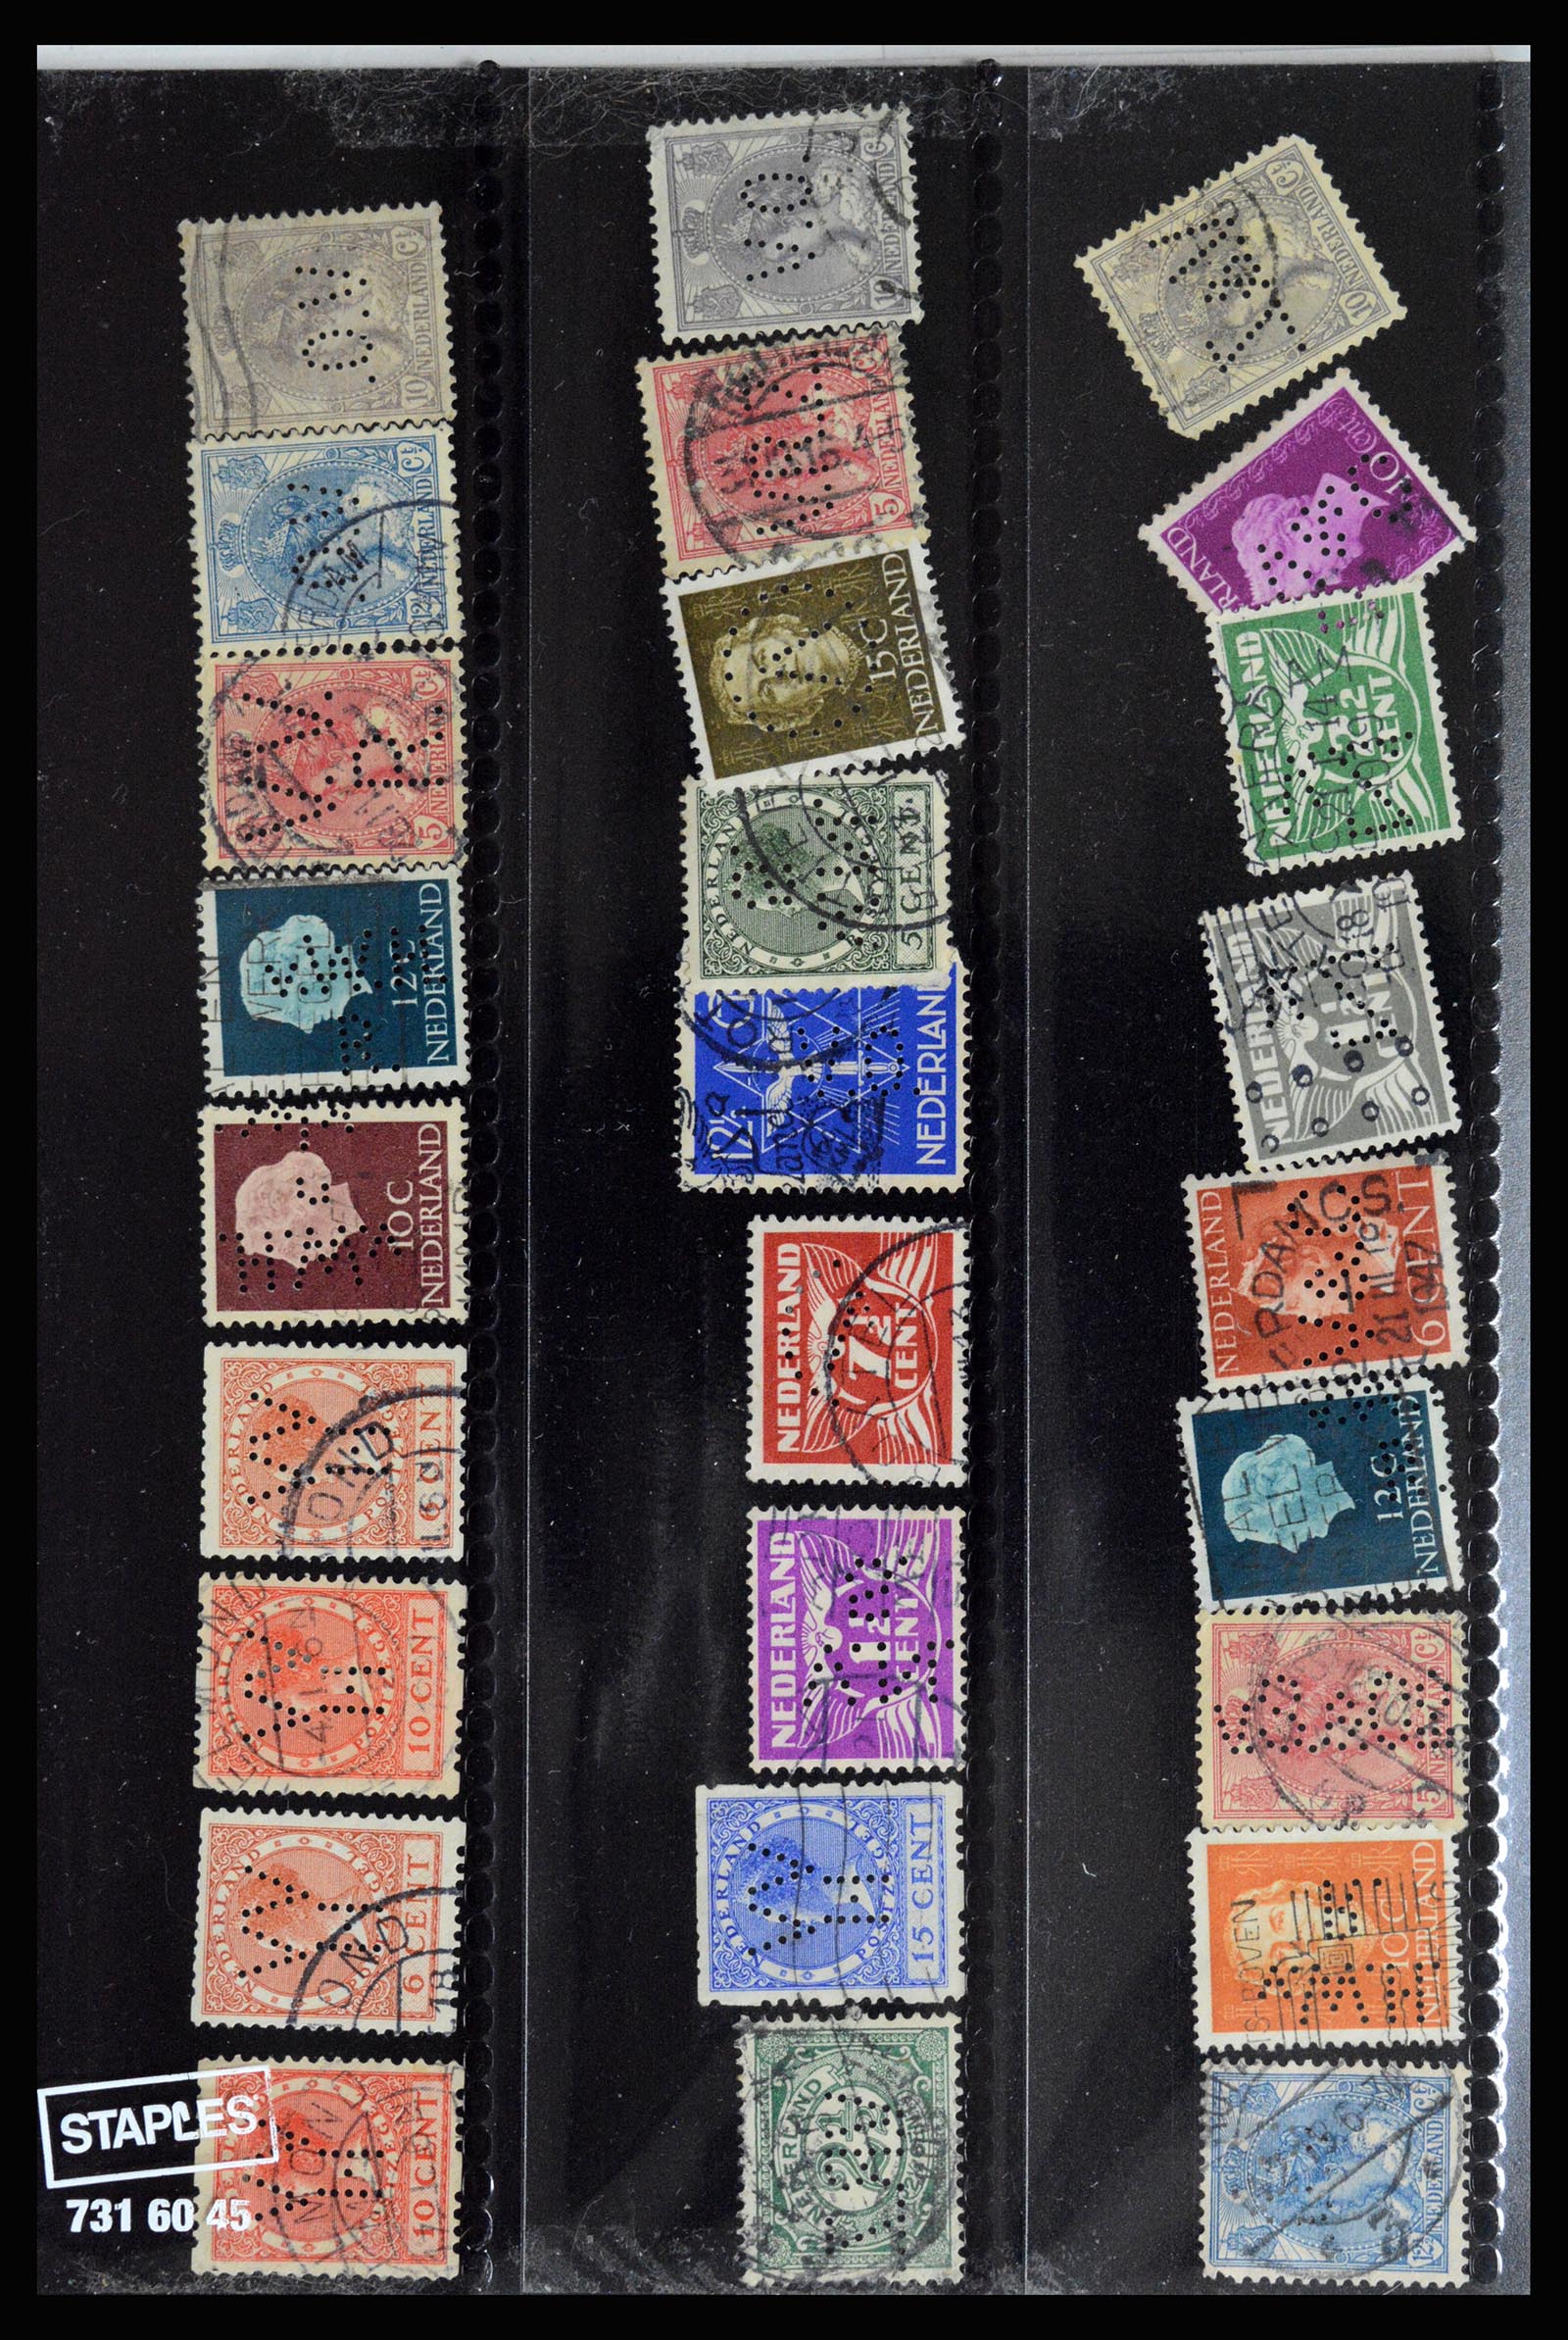 36849 045 - Stamp collection 36849 Netherlands perfins 1891-1960.